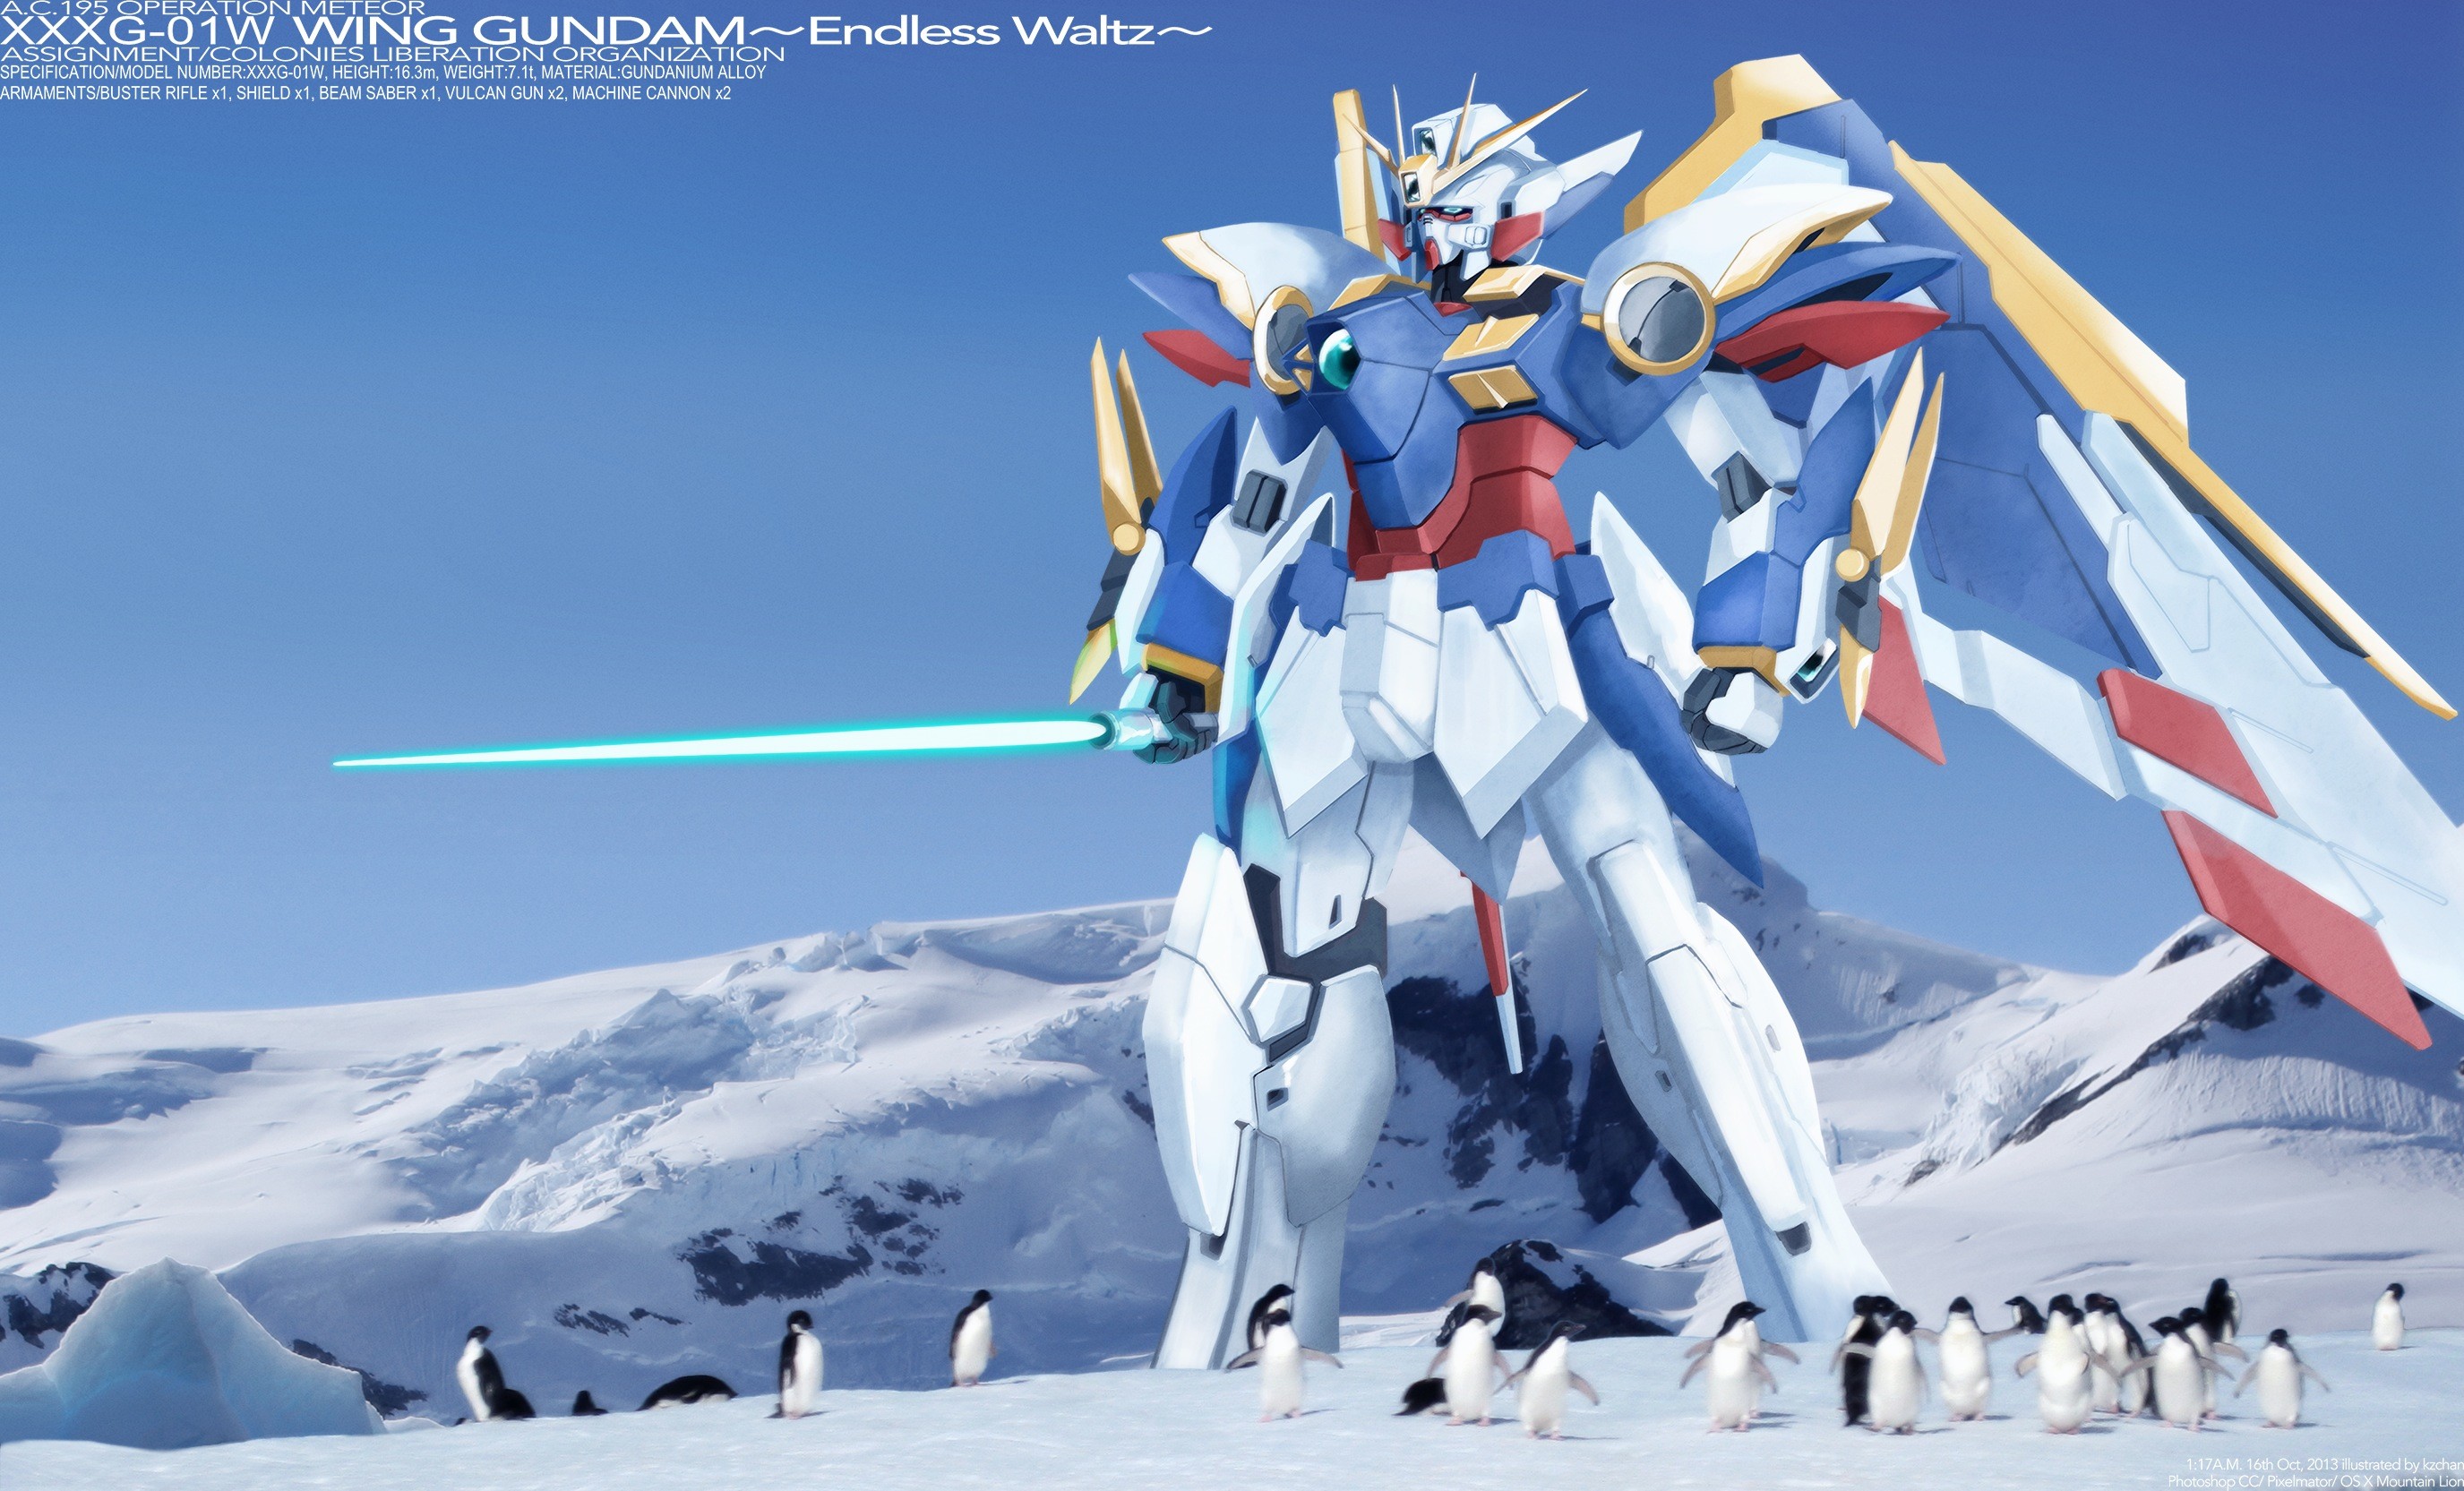 Wallpaper of Wing Gundam hanging out with some Penguins